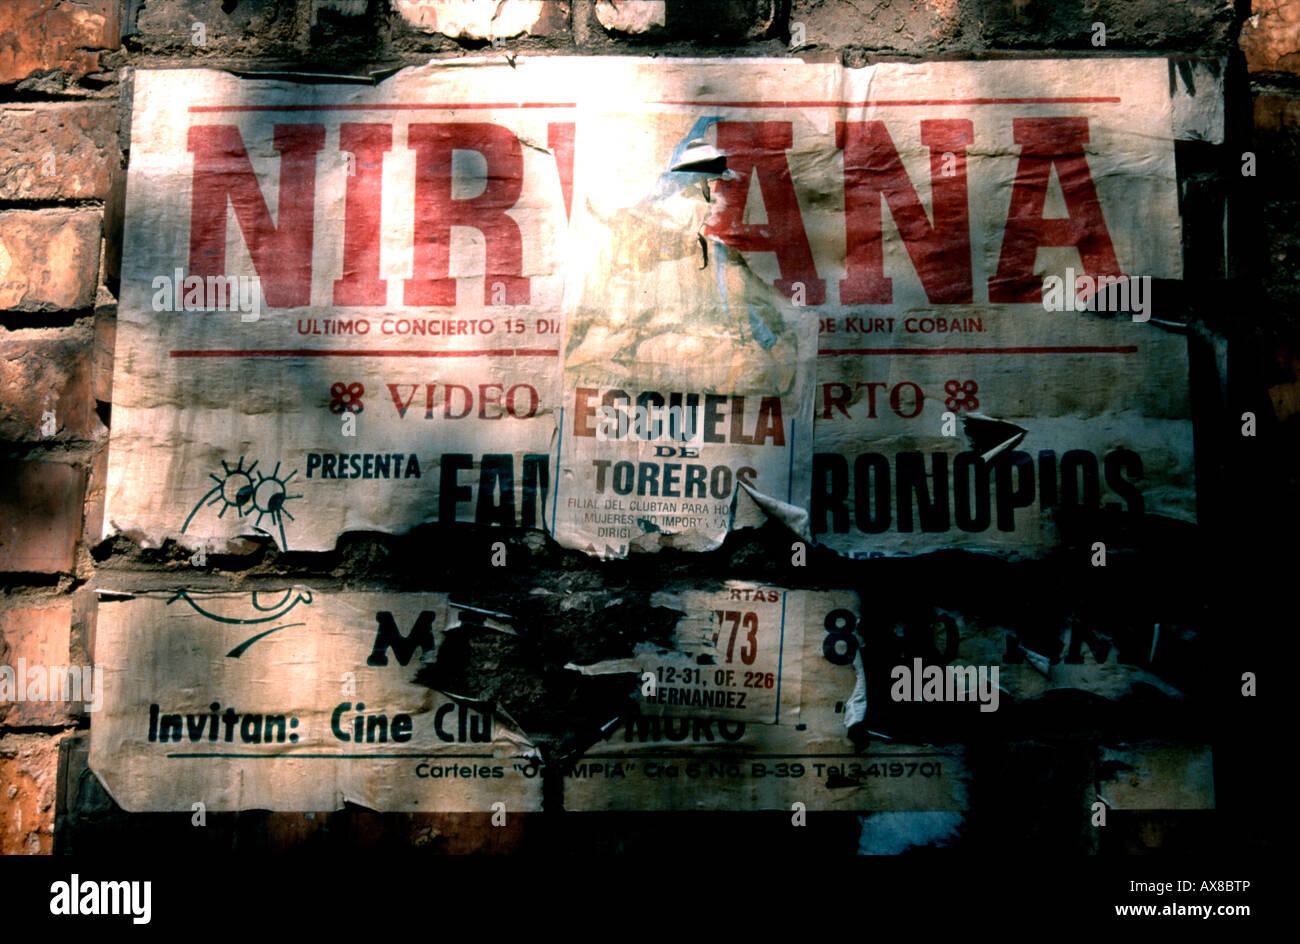 Poster for Nirvana rock concert on wall in Bogota Colombia Stock Photo